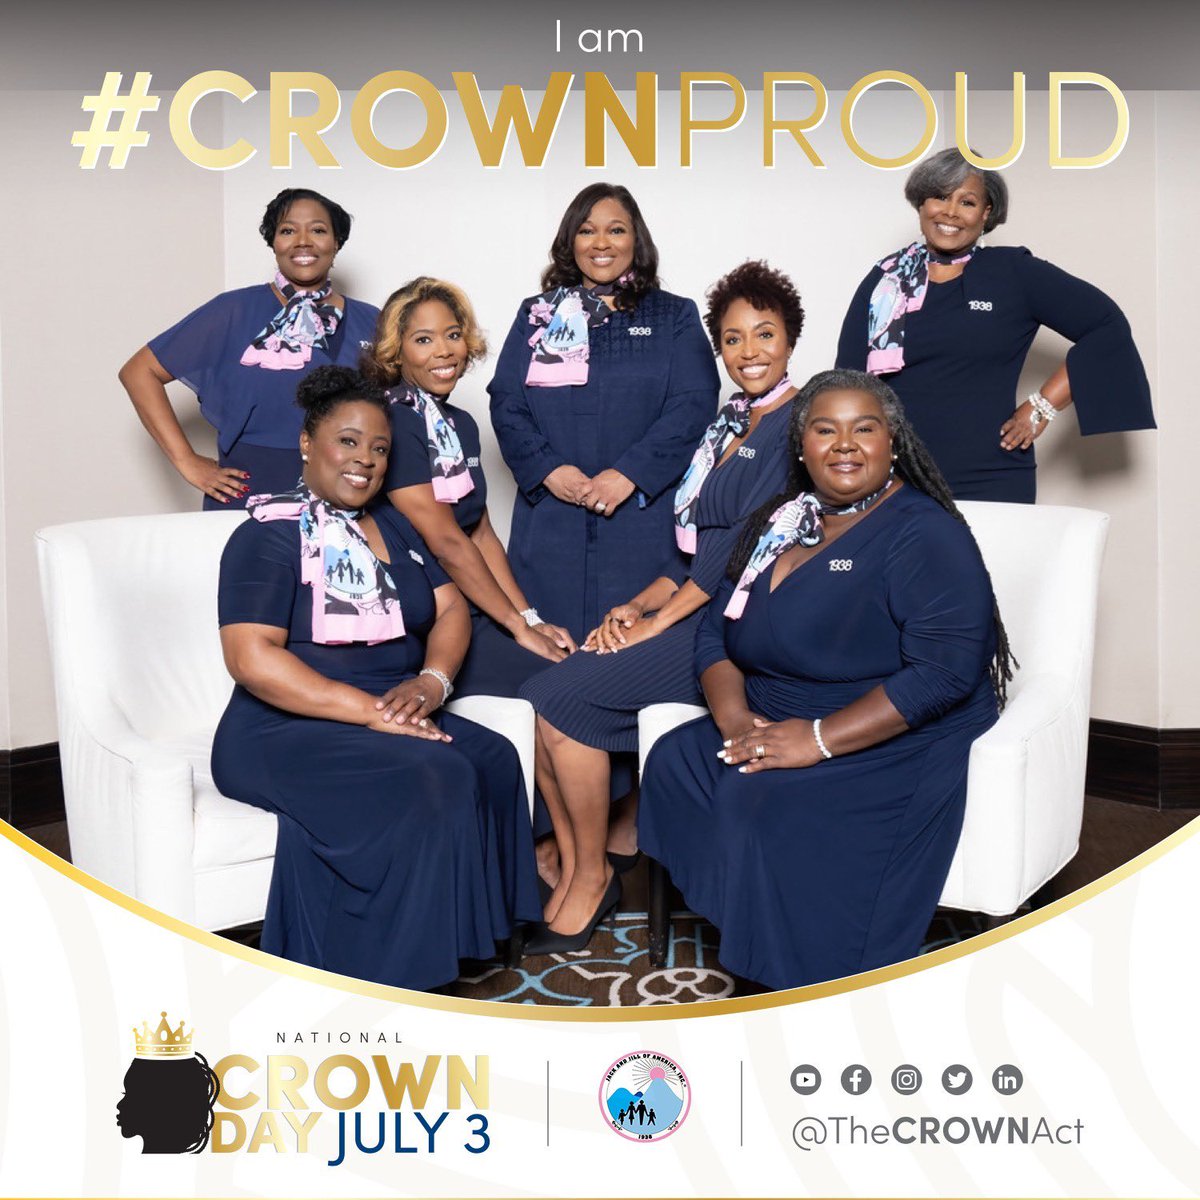 The Jack and Jill Inc. National Executive Board is #CROWNProud! 

Celebrate National CROWN Day today - July 3rd by wearing your CROWN and posting your picture with this National CROWN Day Frames. Visit @thecrownact for more information. #jackandjillinc #CROWNProud #PassTheCROWN